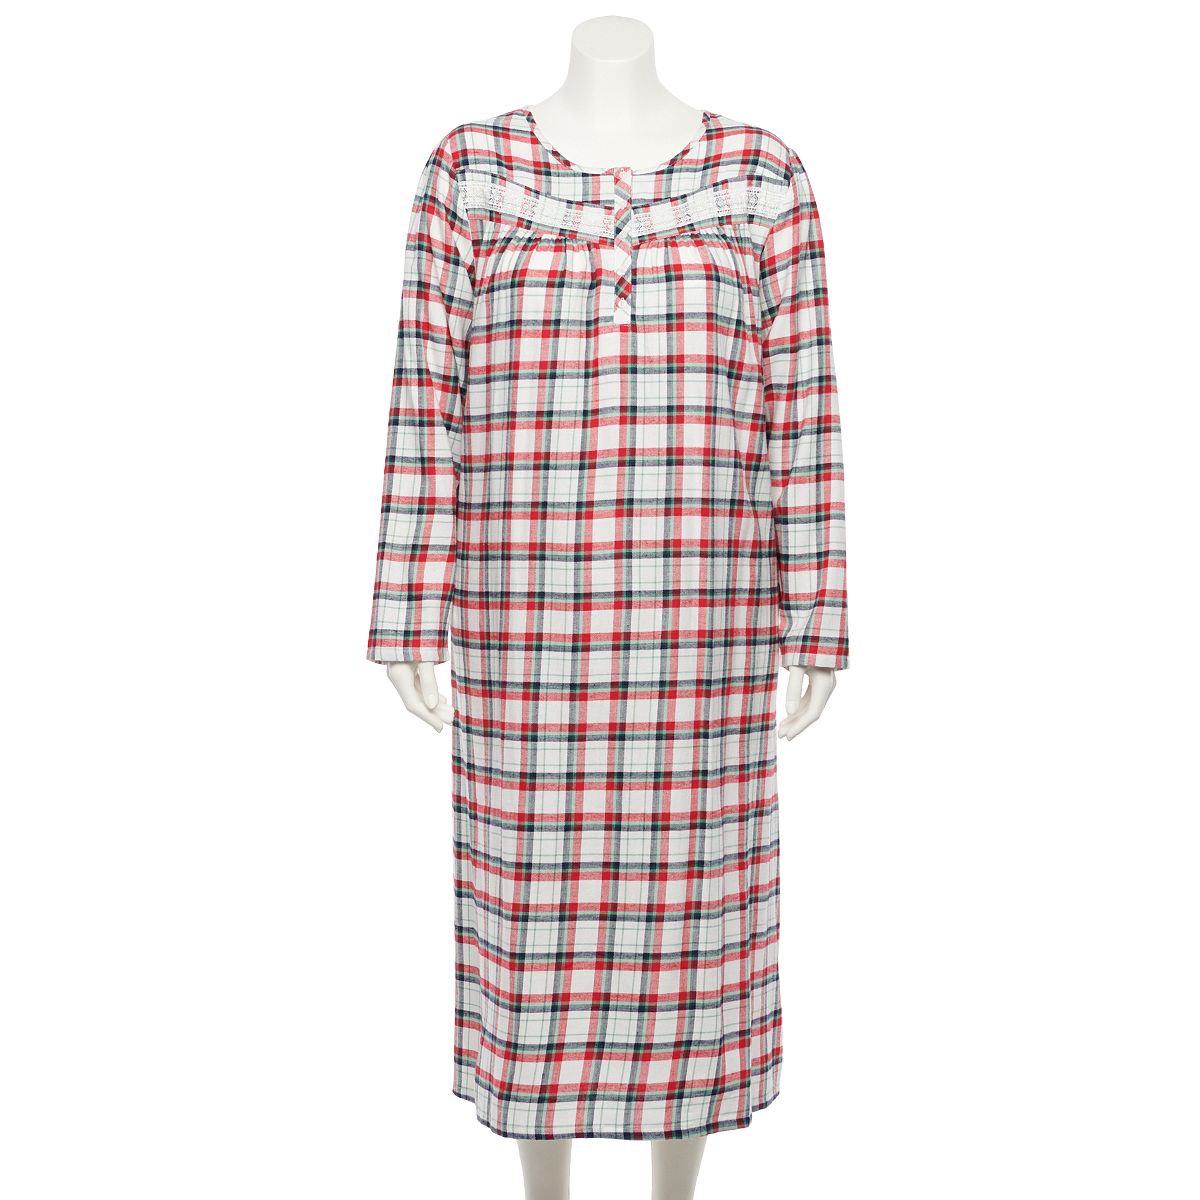 Flannel nightgowns